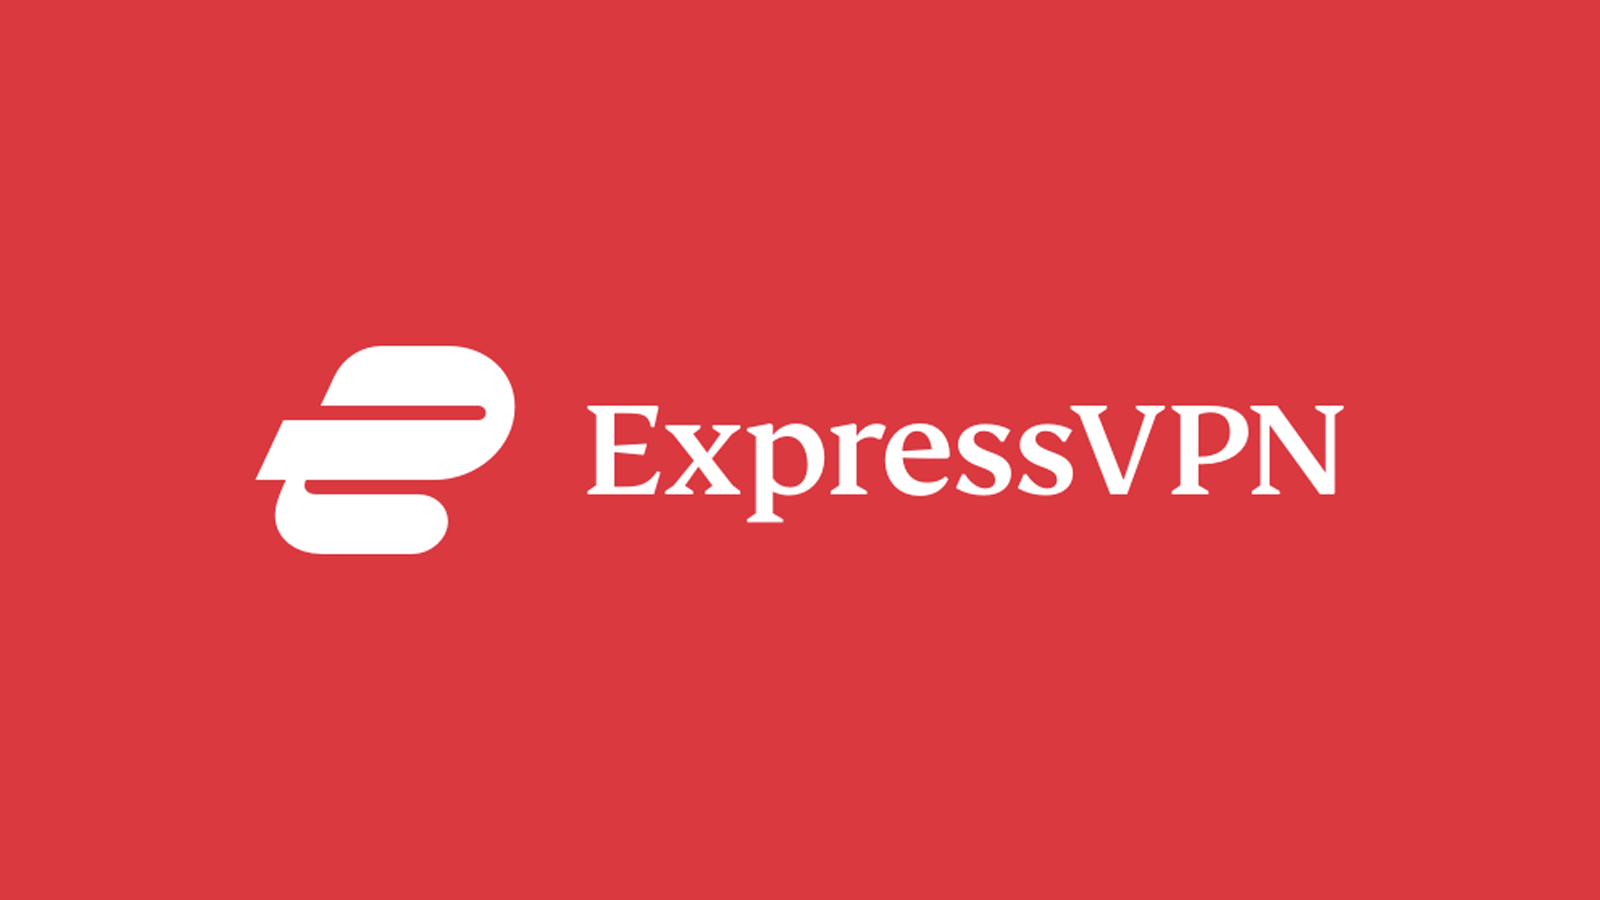 ExpressVPN company name and logo against red background